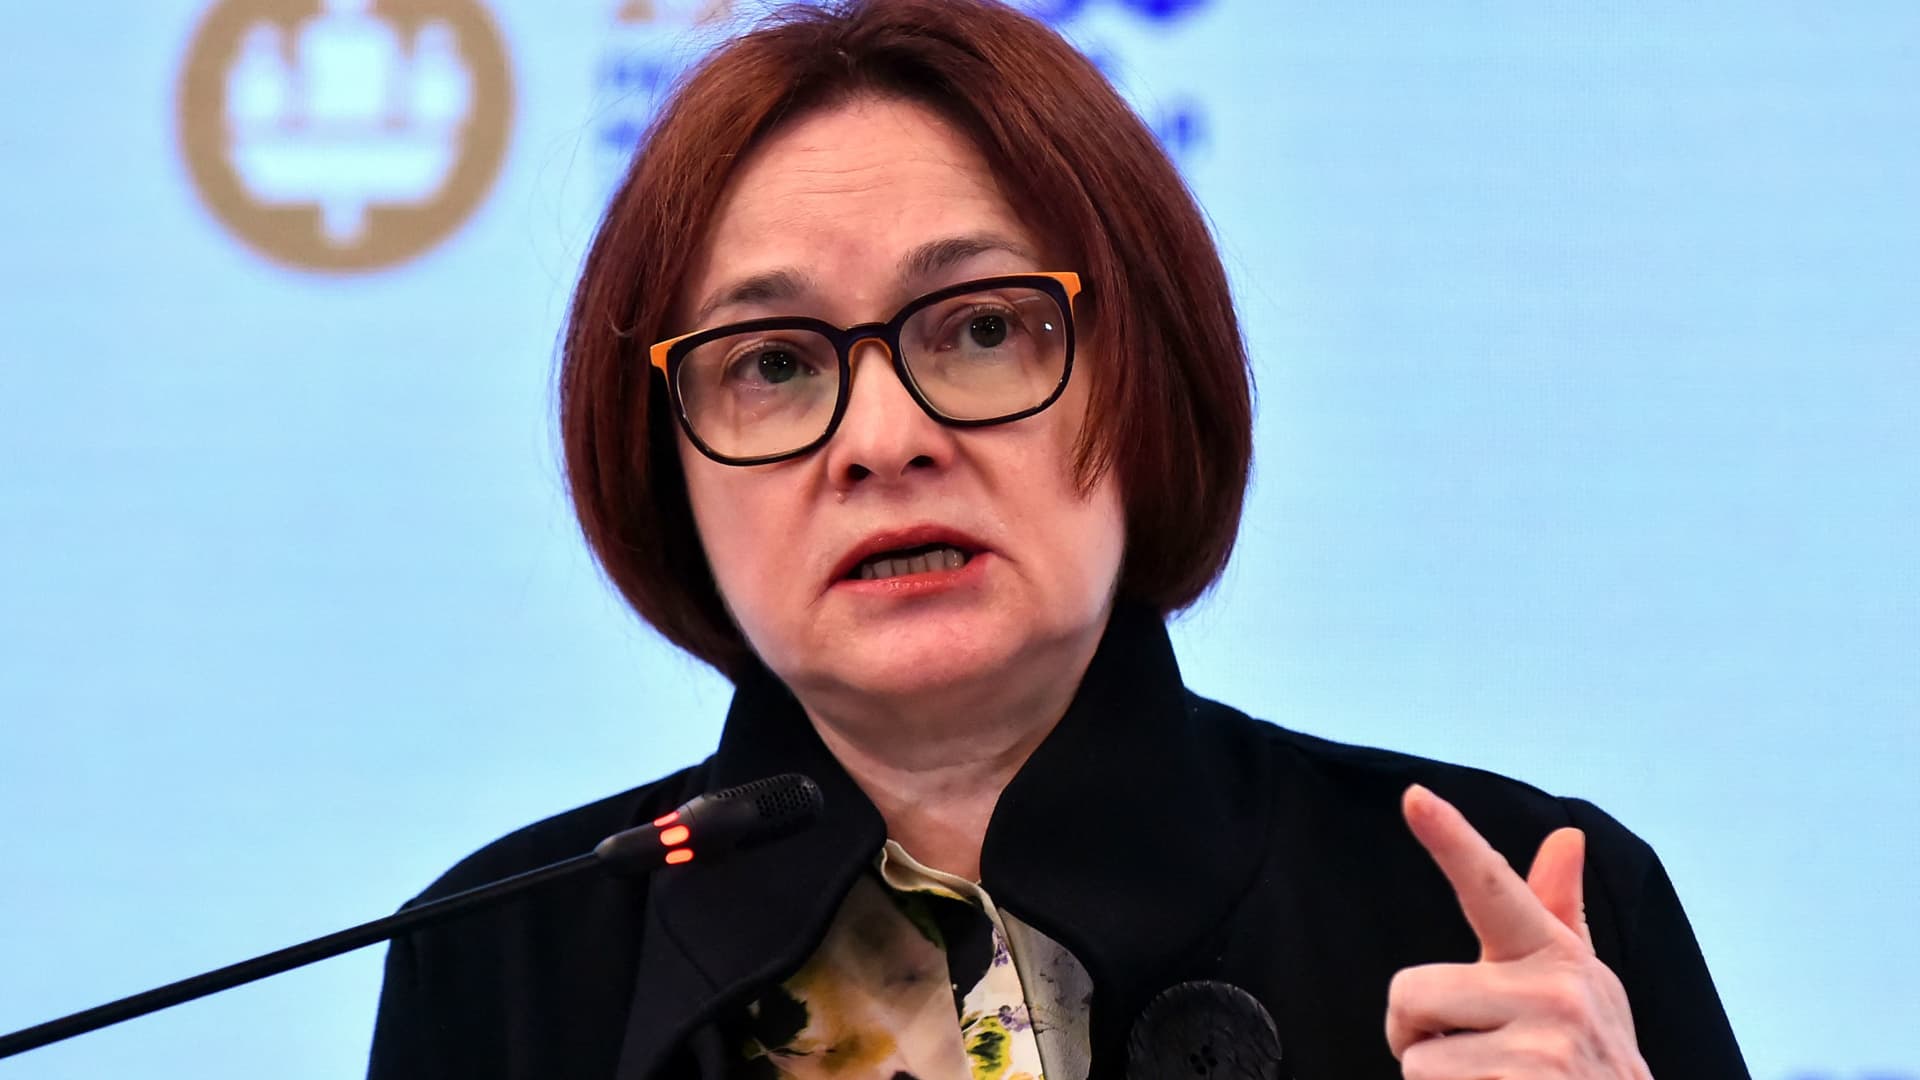 Russia's Central bank chief Elvira Nabiullina attends a session of the Saint Petersburg International Economic Forum (SPIEF) in Saint Petersburg on June 16, 2022.